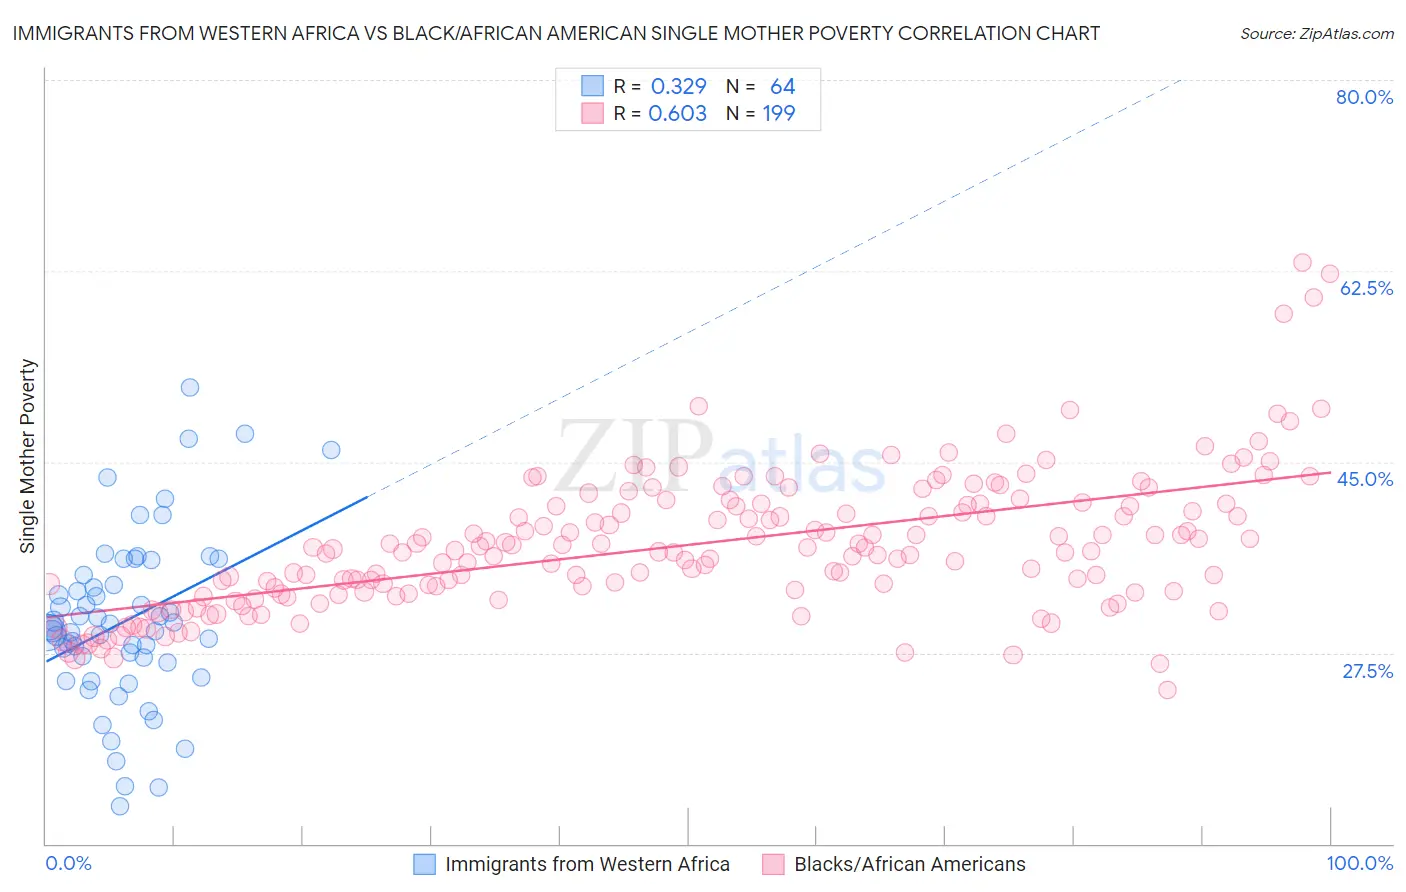 Immigrants from Western Africa vs Black/African American Single Mother Poverty